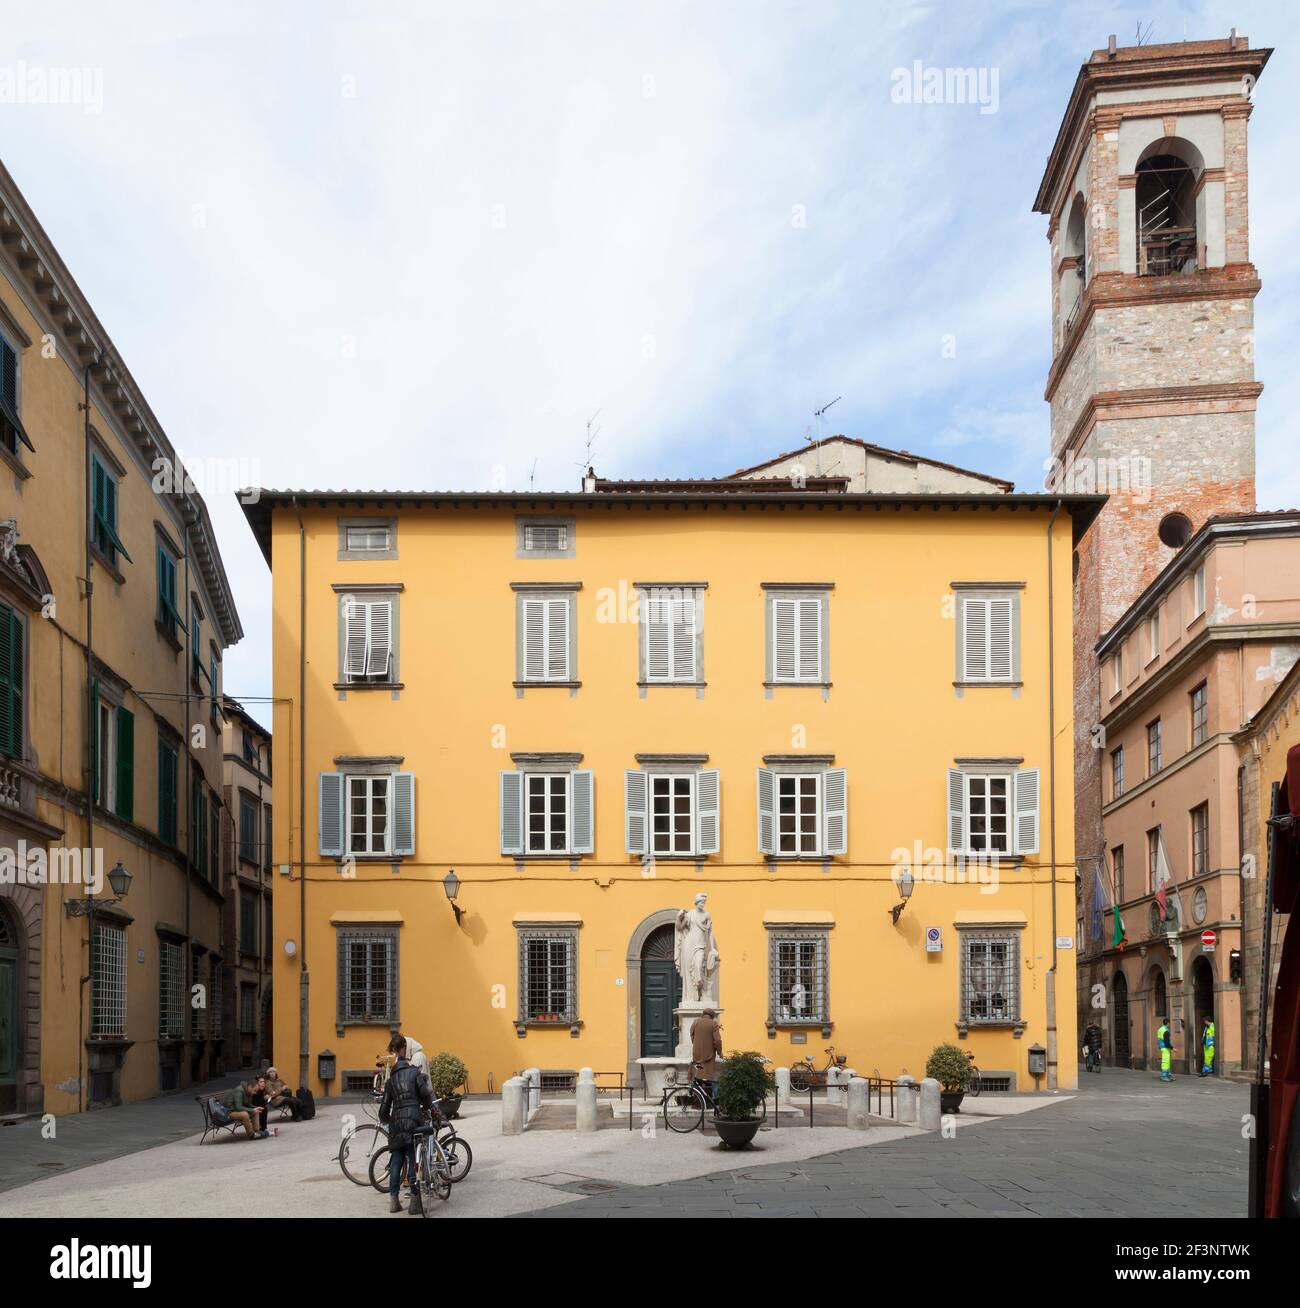 General views of typical Tuscan architecture, houses and shops in Lucca, Tuscany. Stock Photo